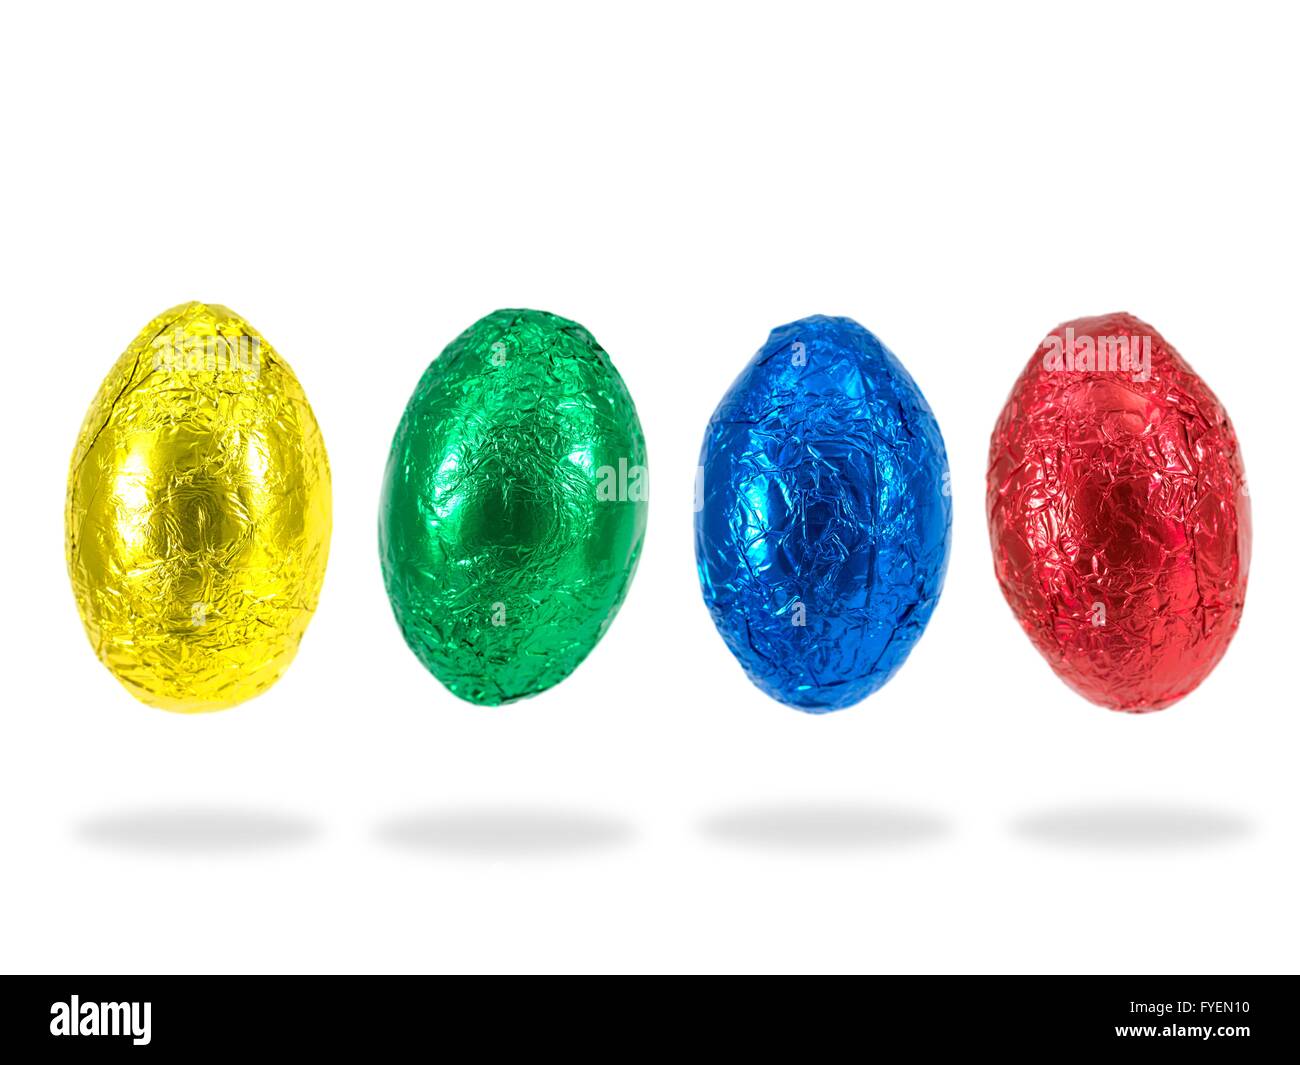 Chocolate Easter eggs isolated against a white background Stock Photo